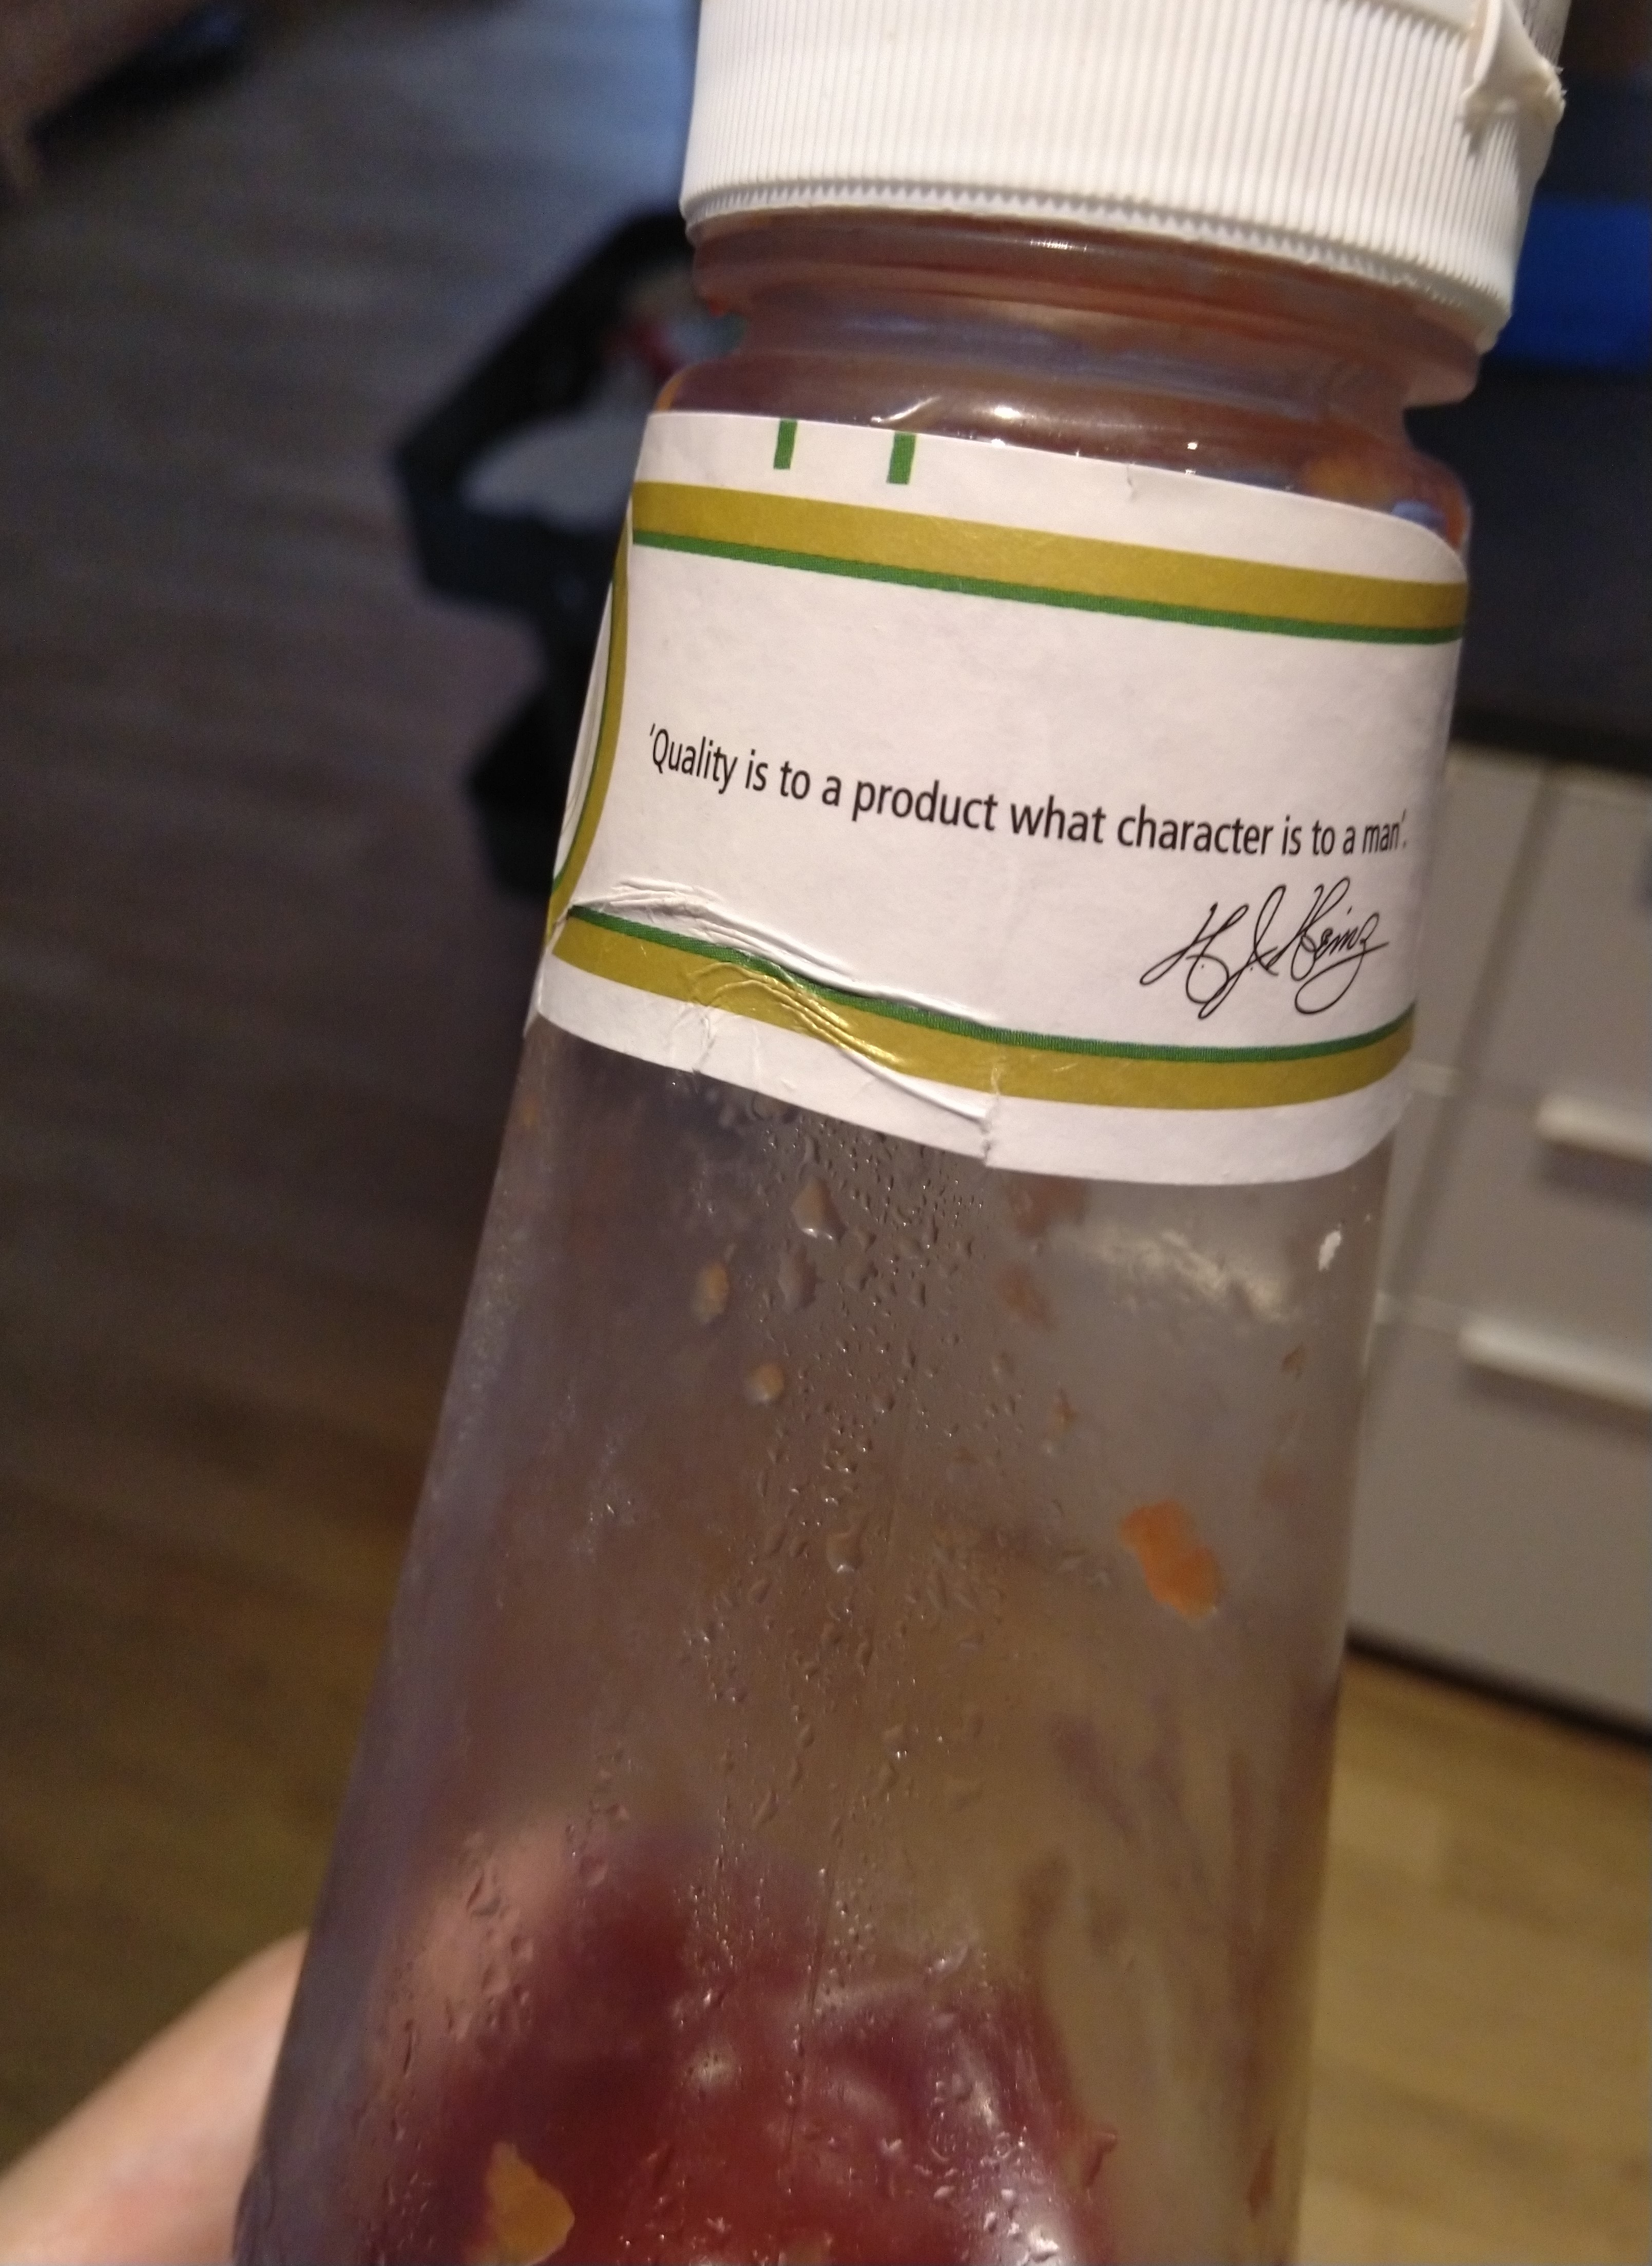 Sometimes a Ketchup bottle can bring some insights to your life.